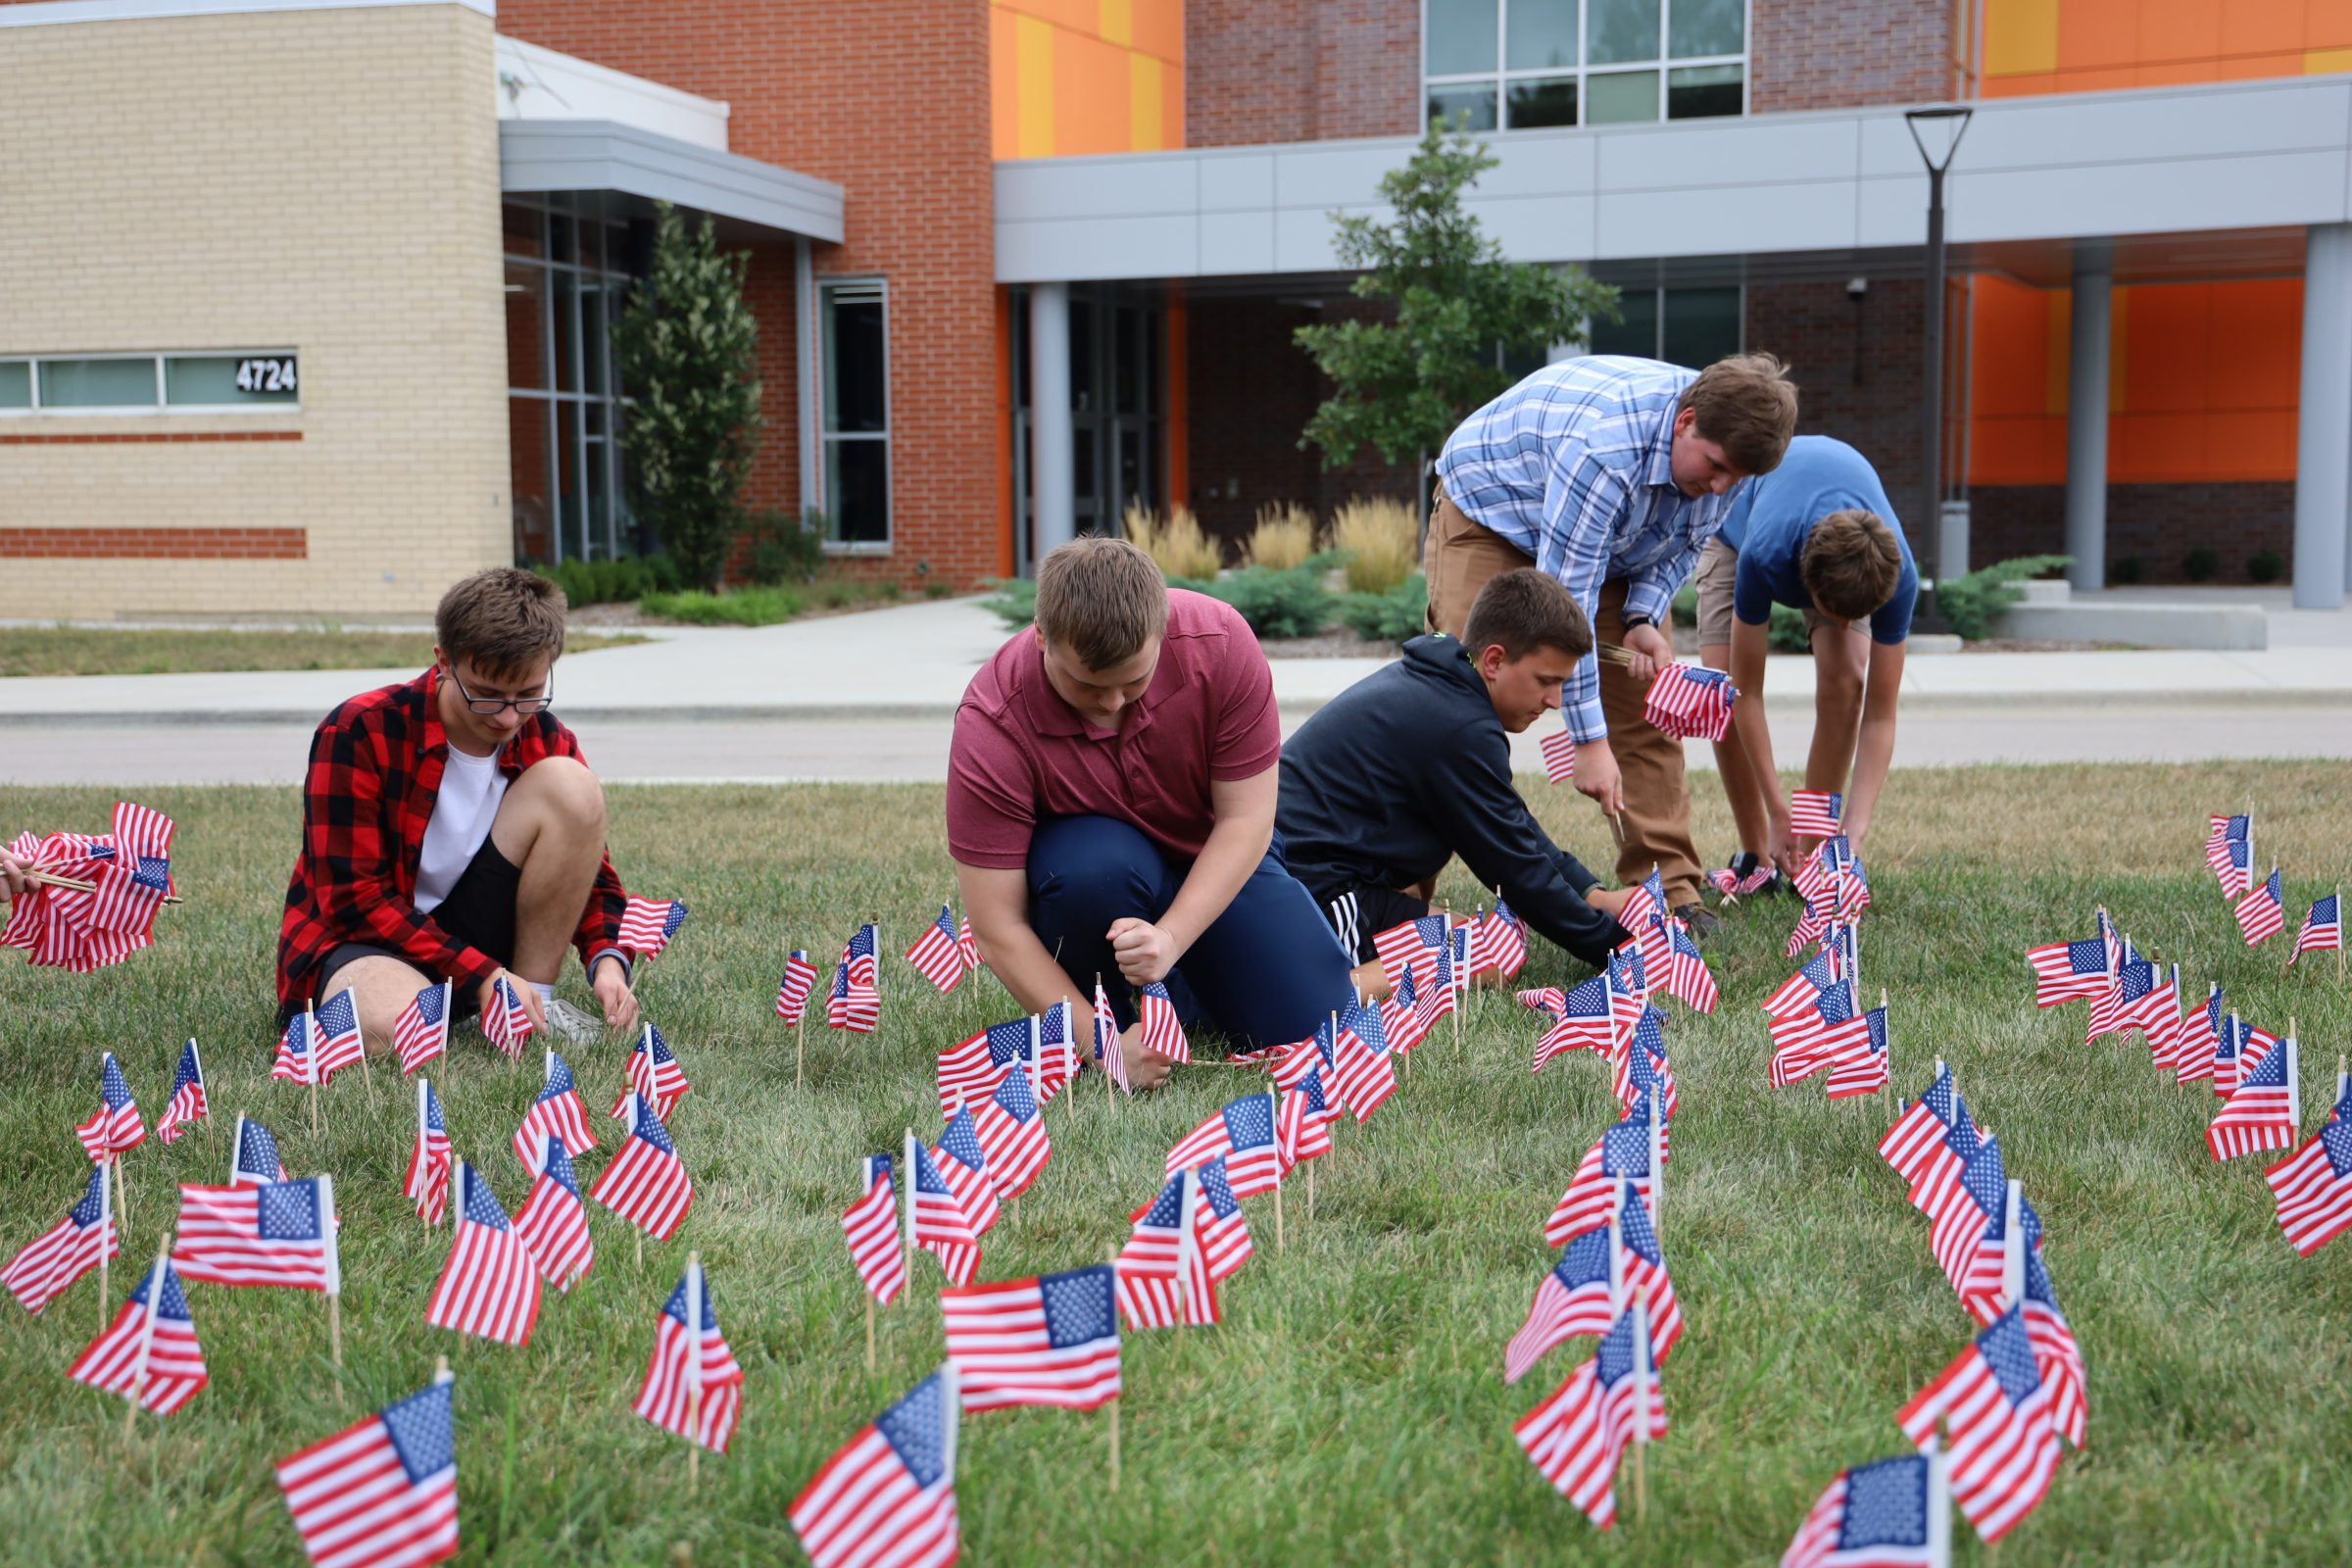 Students setting up many small American flags in the grass